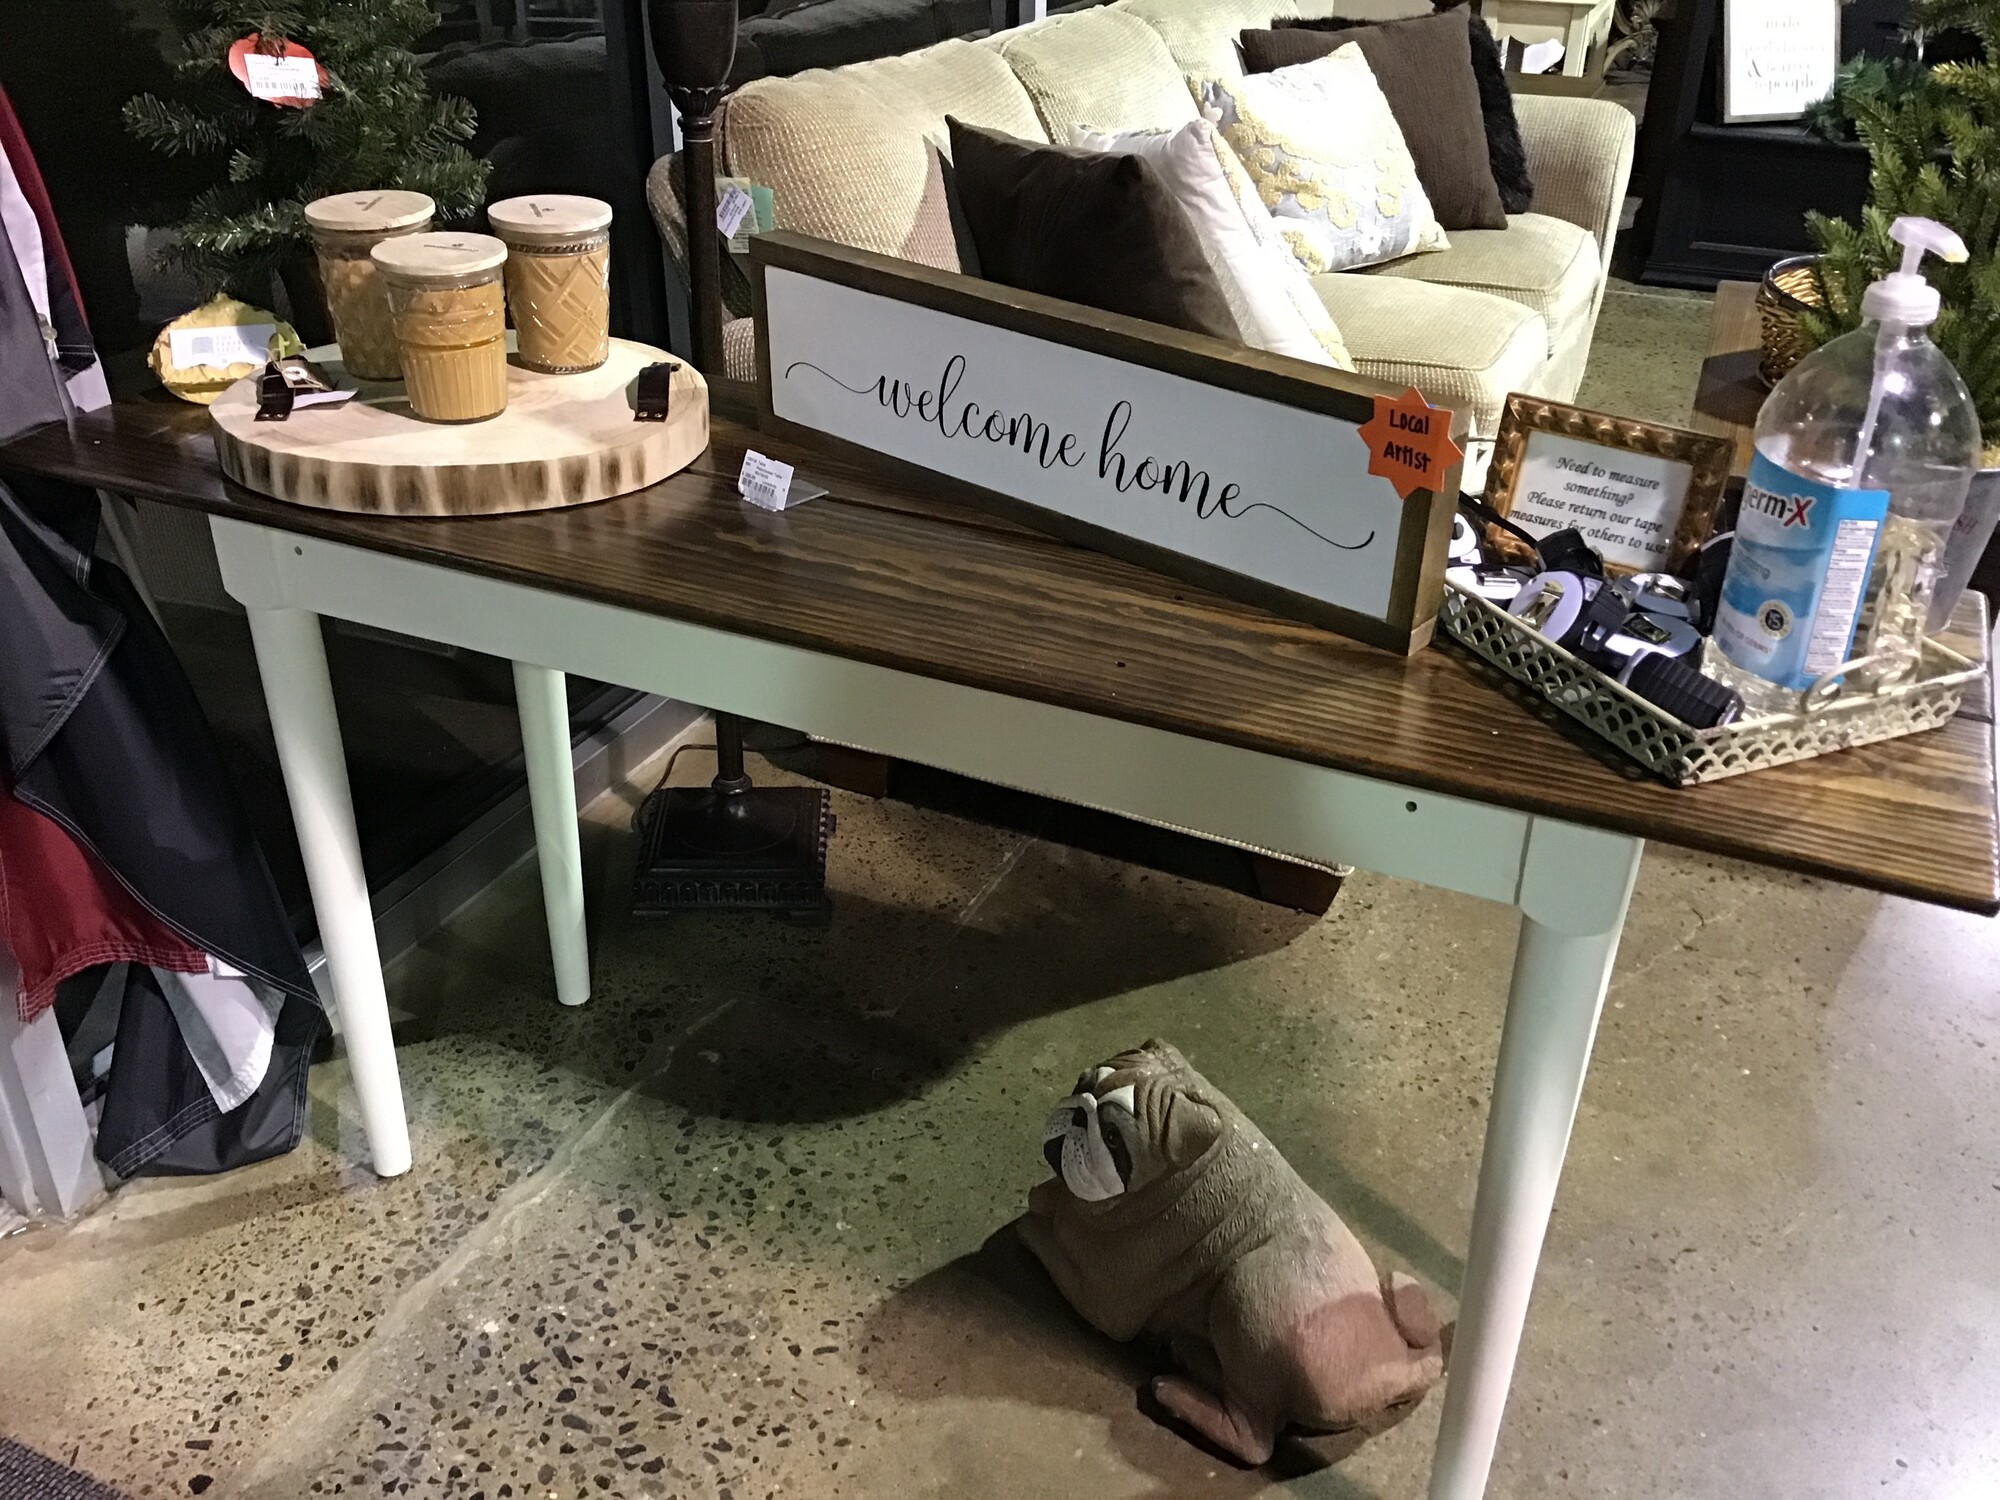 This gorgeous console table was handmade by one of our local artists.The top and sides are made from reclaimed bleacher seats from Grove City School District.  The legs are from a display table that he bought from a local Macy's when they went out of business. Such rich heritage with this piece!
Dimensions are 60 in x 18 in x 30 in